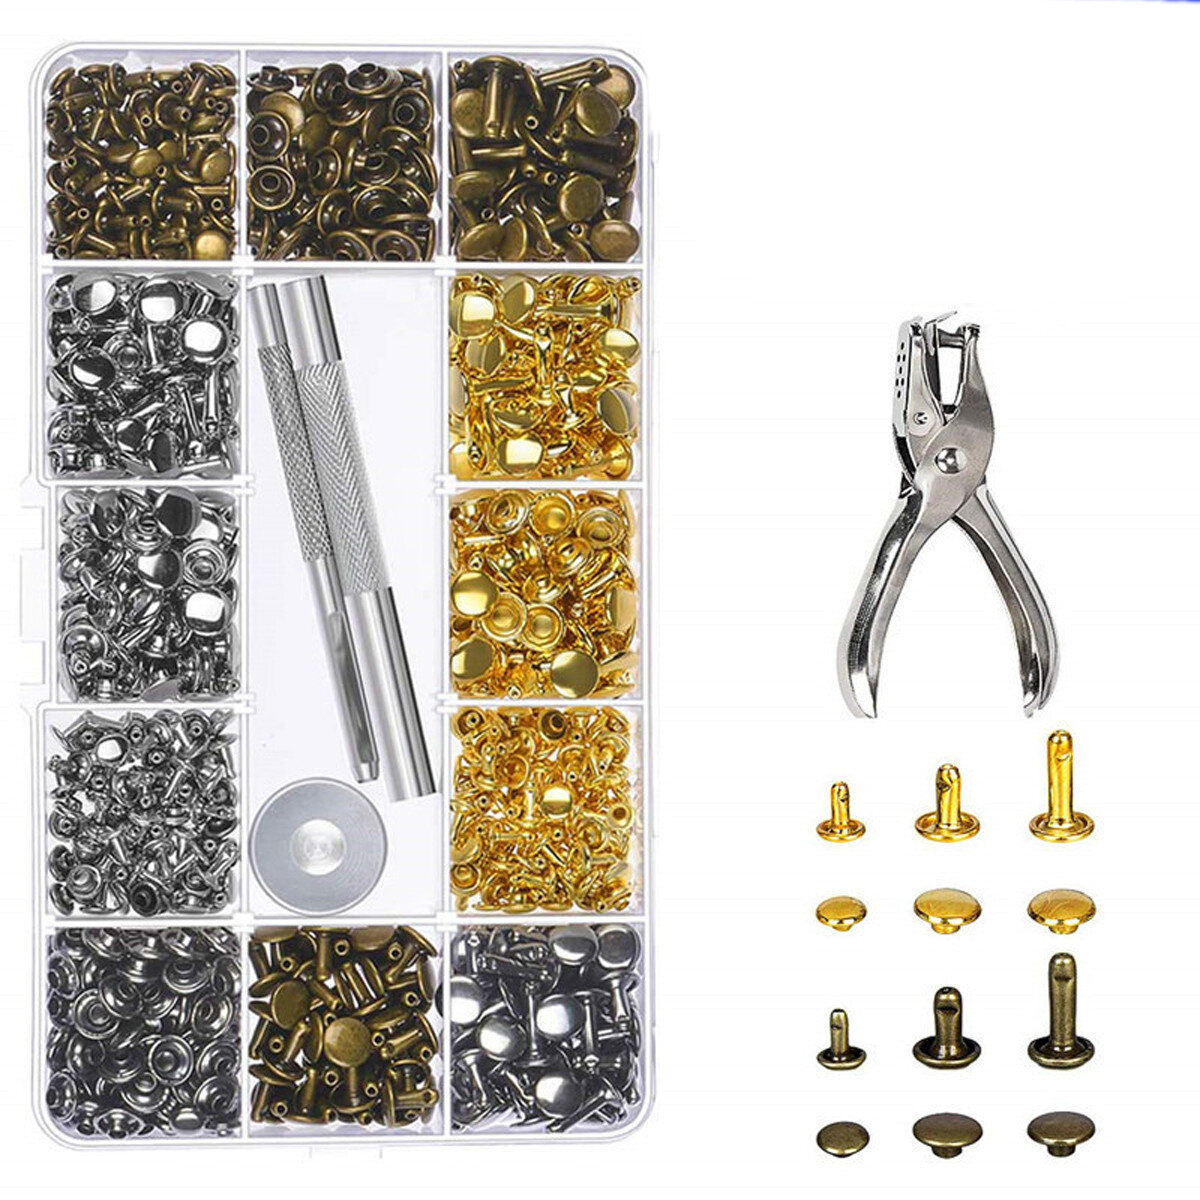 360Pcs Leather Rivets Double Cap Rivets Metal Fixing Tool With Punch Pliers Kit Craft Snap Fastener Press Button Repair